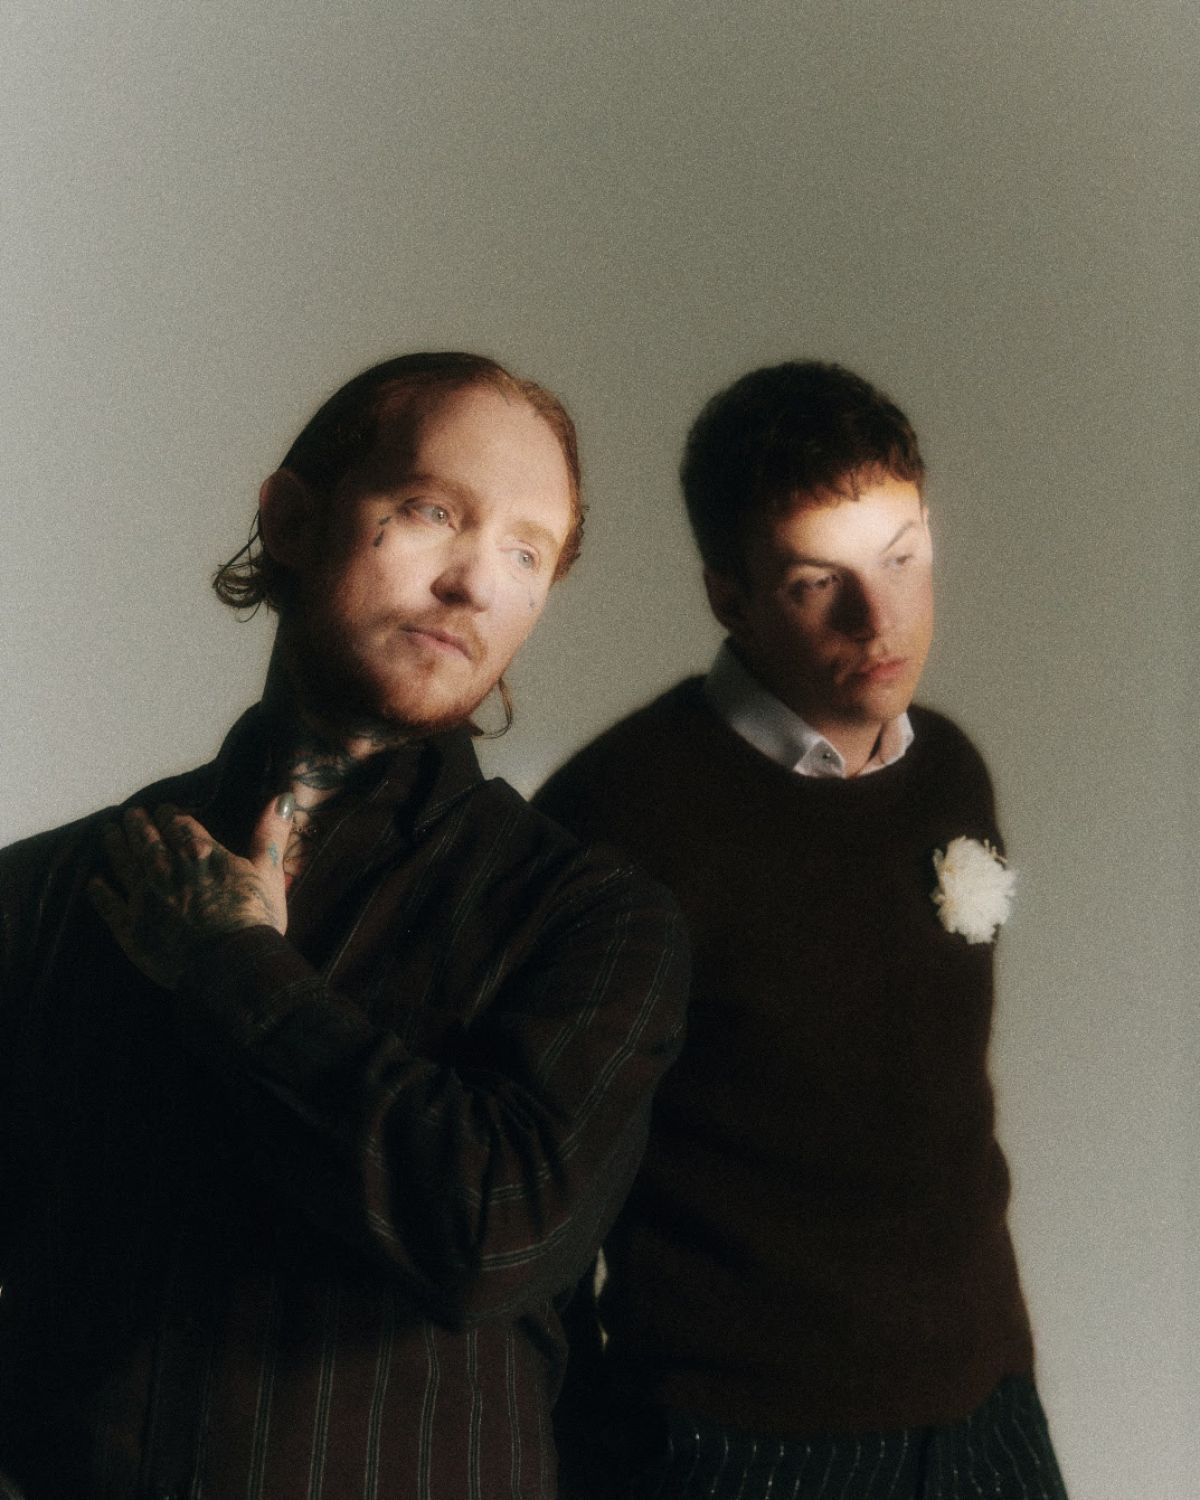 Frank Carter and The Rattlesnakes: “Well done, you’ve just found your album”